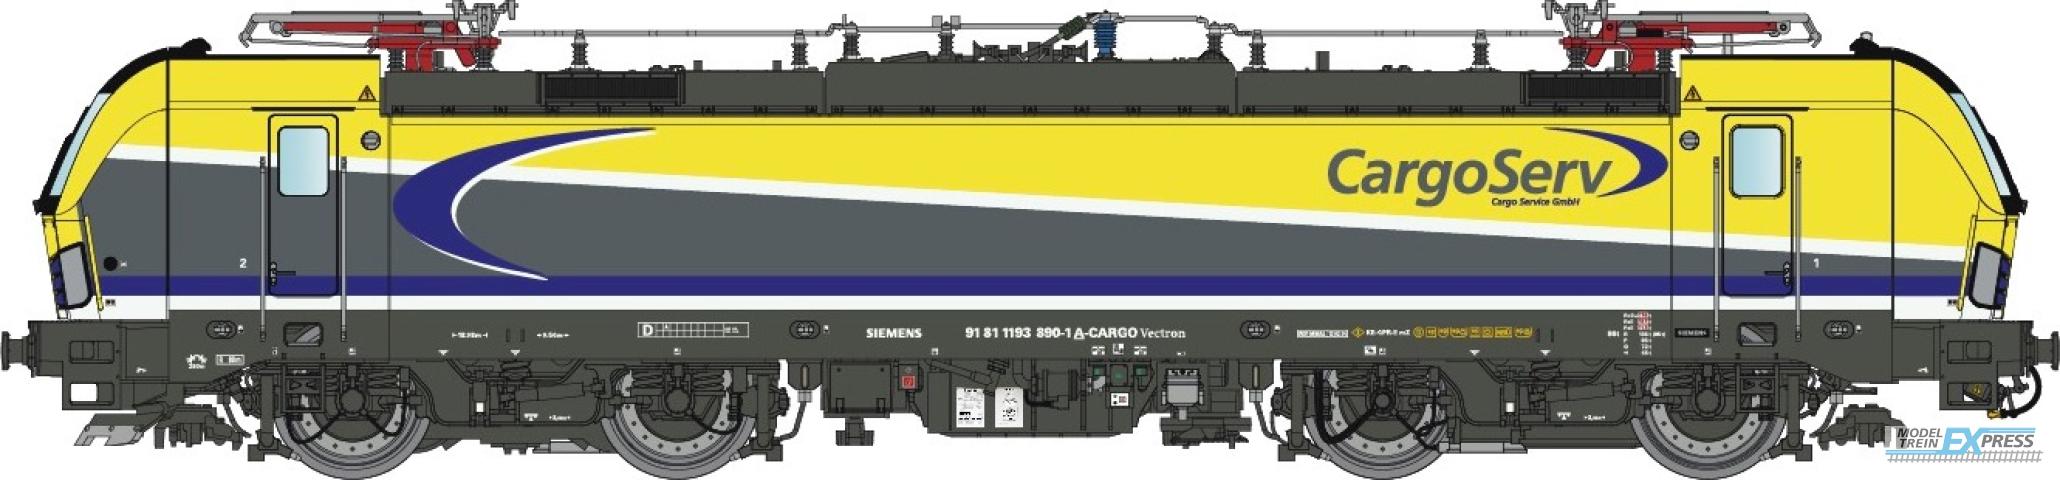 LS Models 18005S A-CARGO, yellow/silver, blue lines, CargoServ, Ep.VI  /  Ep. ---  /  ---  /  ---  /  ---  /  ---